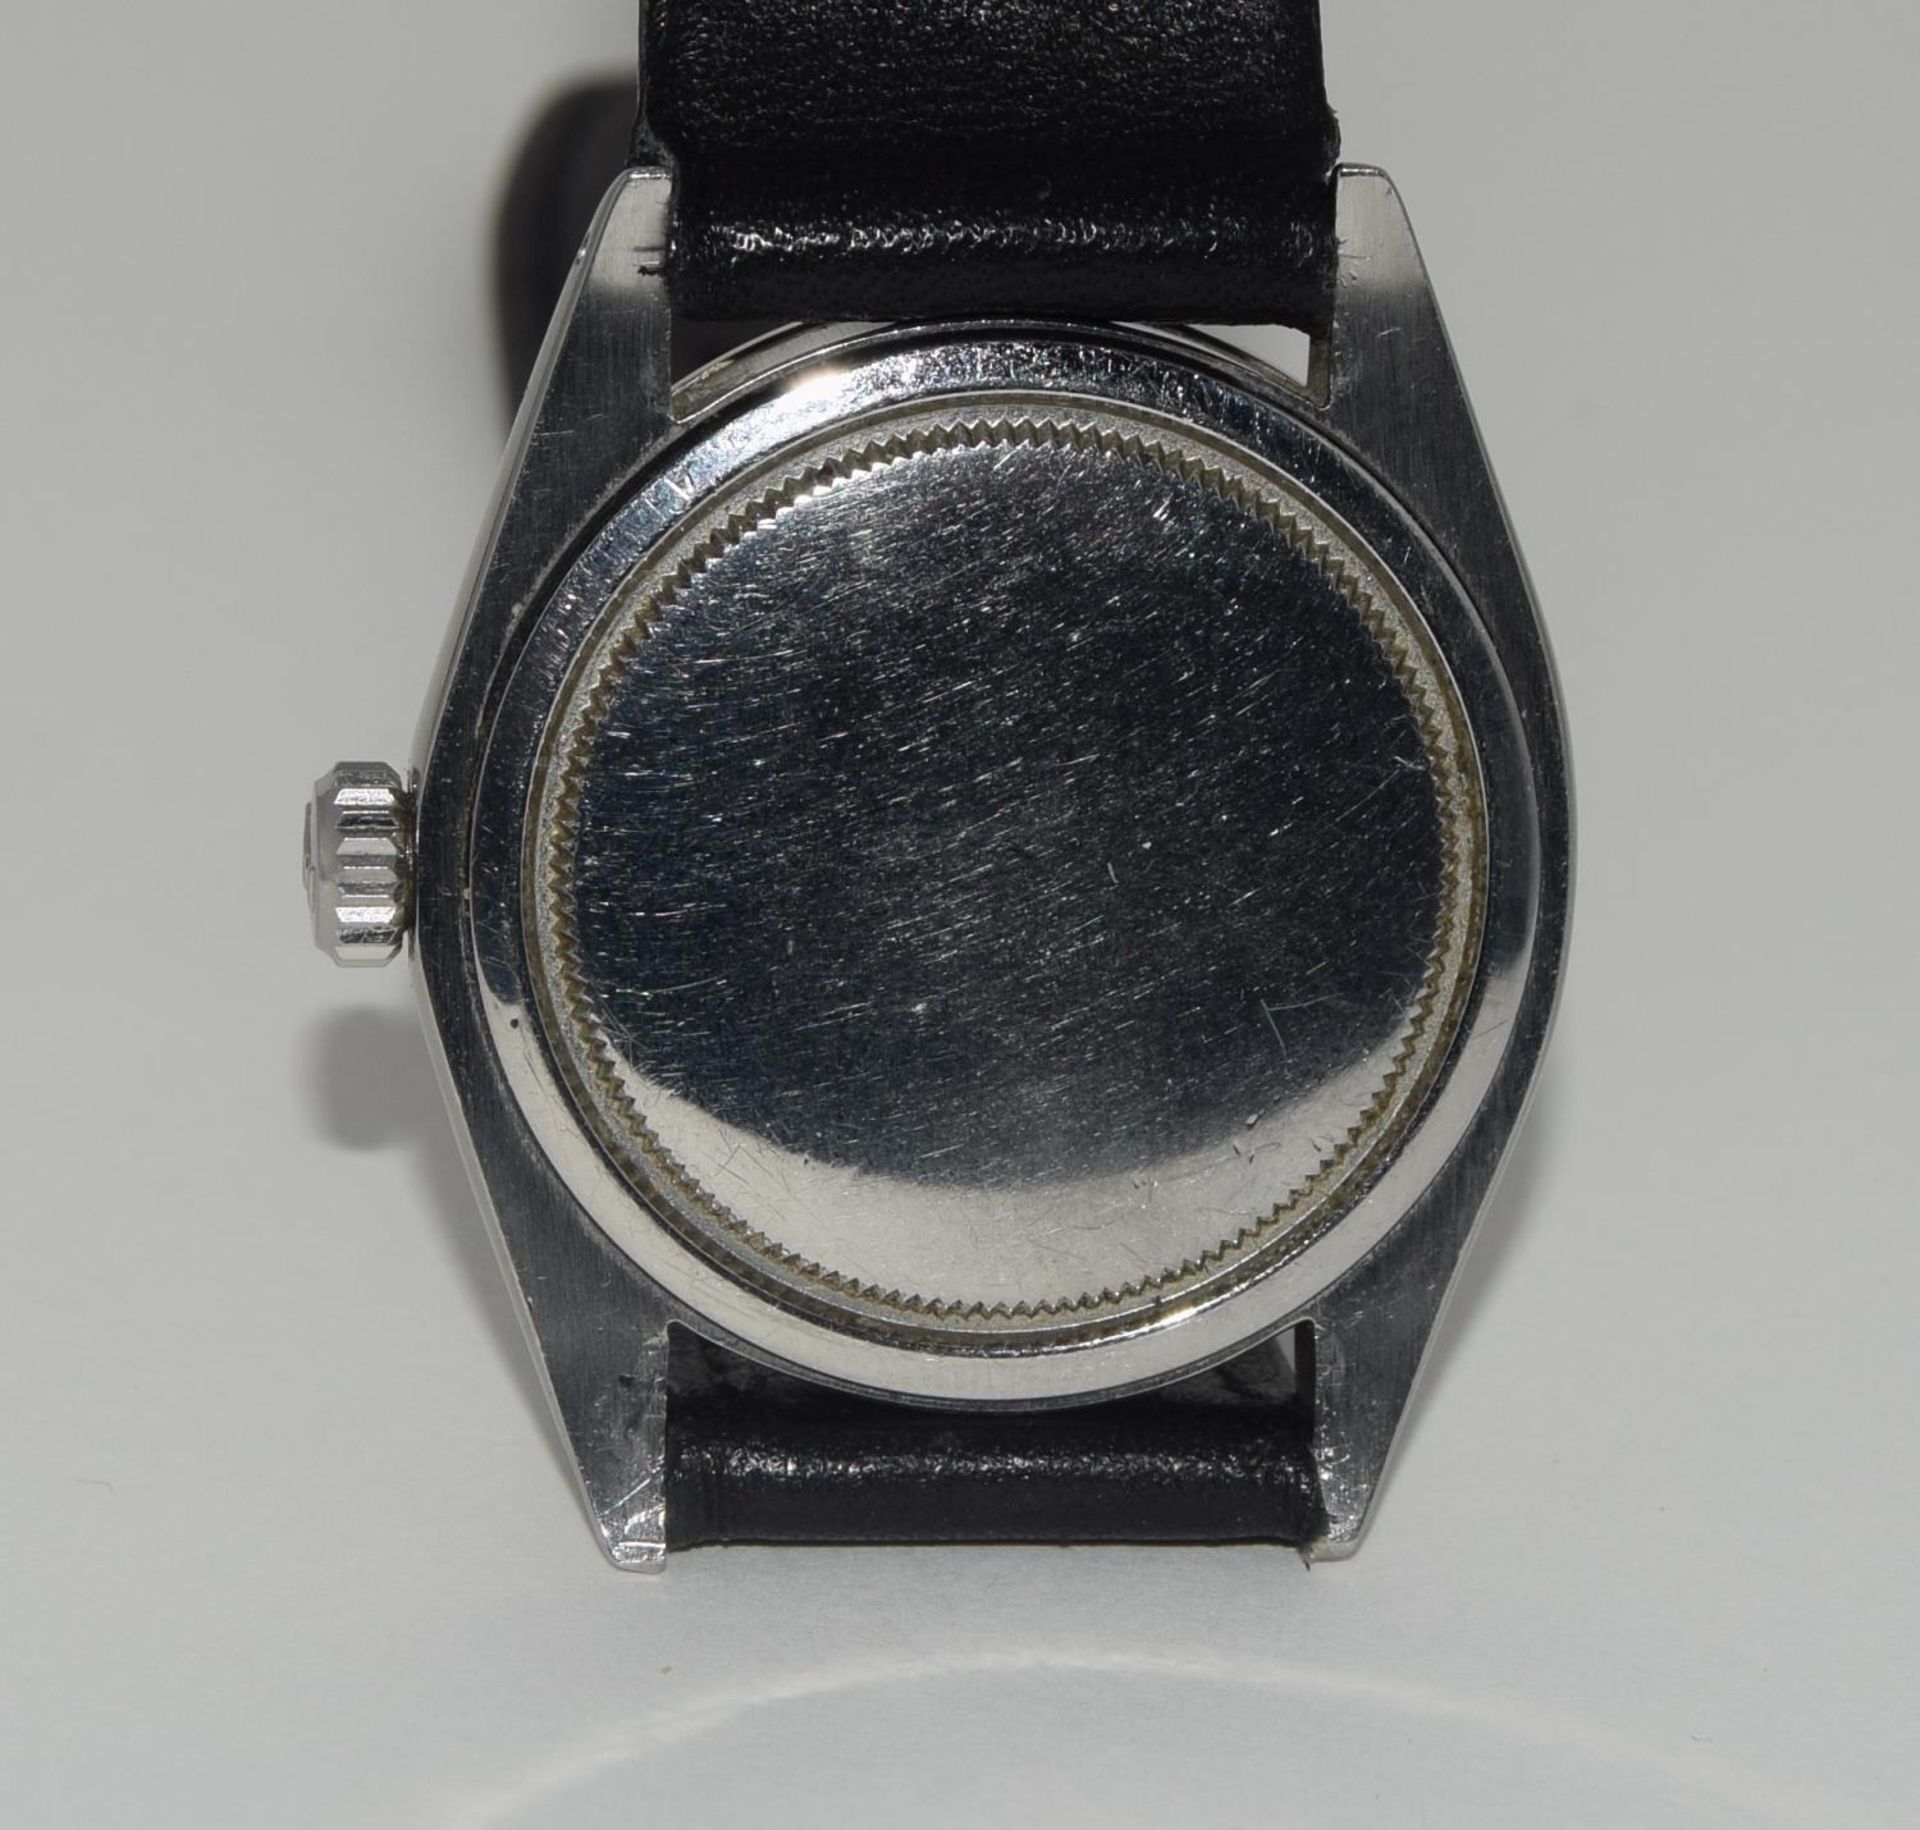 Rolex Oyster Precision silver dial Model 6426, movement 1225 year approx 1973, working condition - Image 6 of 8